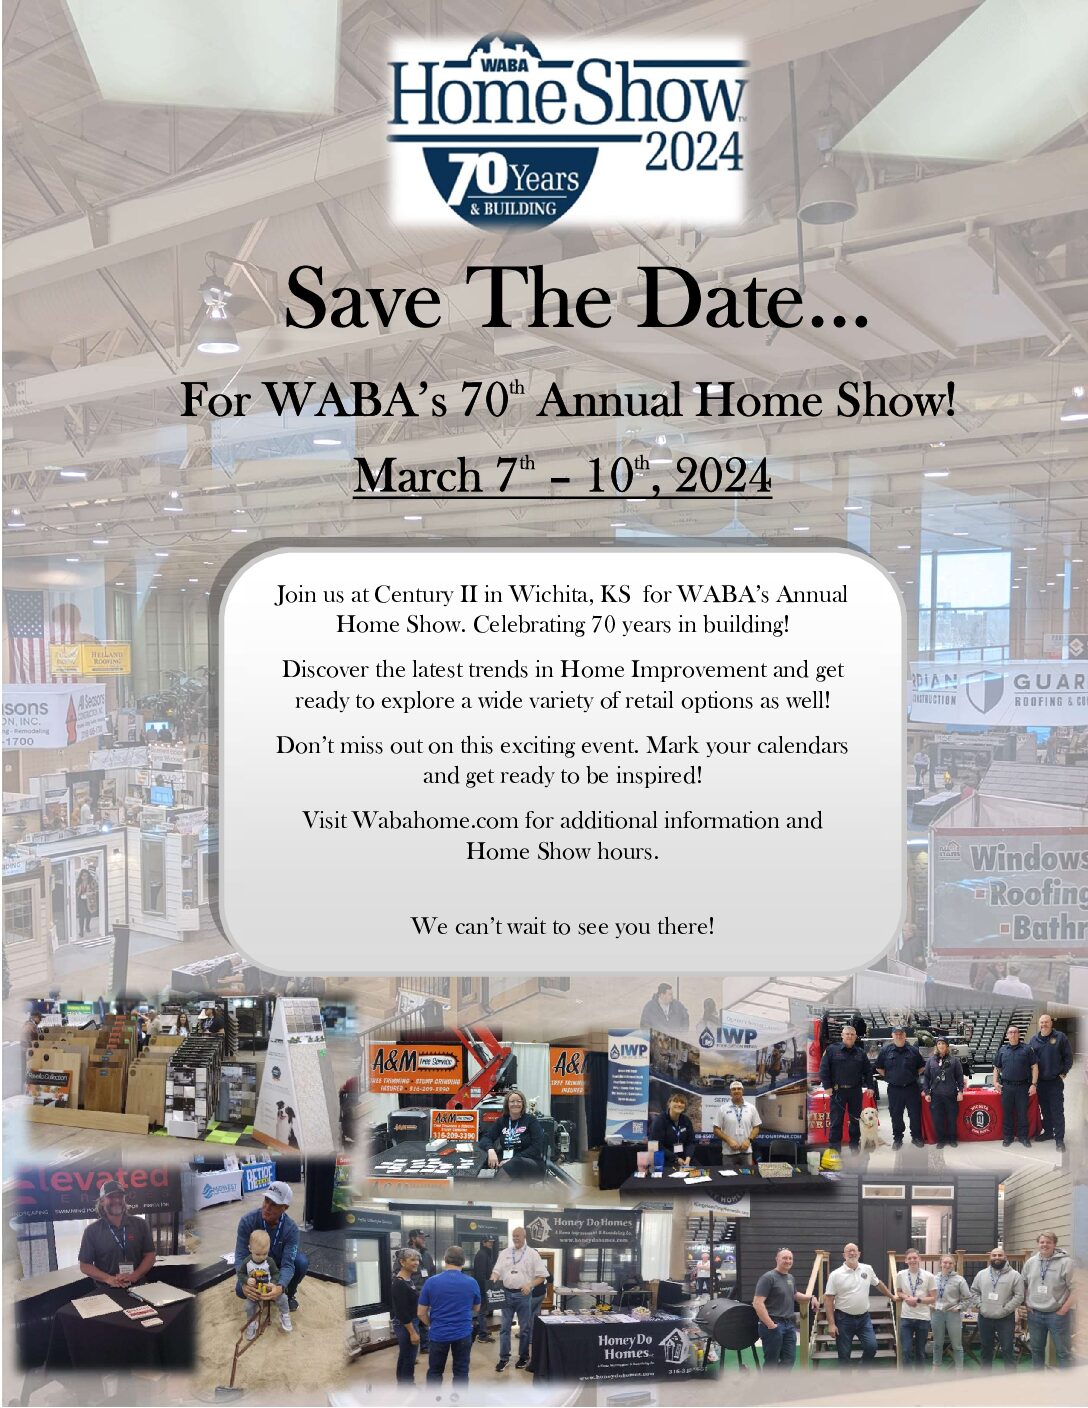 Home Organization Solutions at WABA’s 70th Annual Home Show